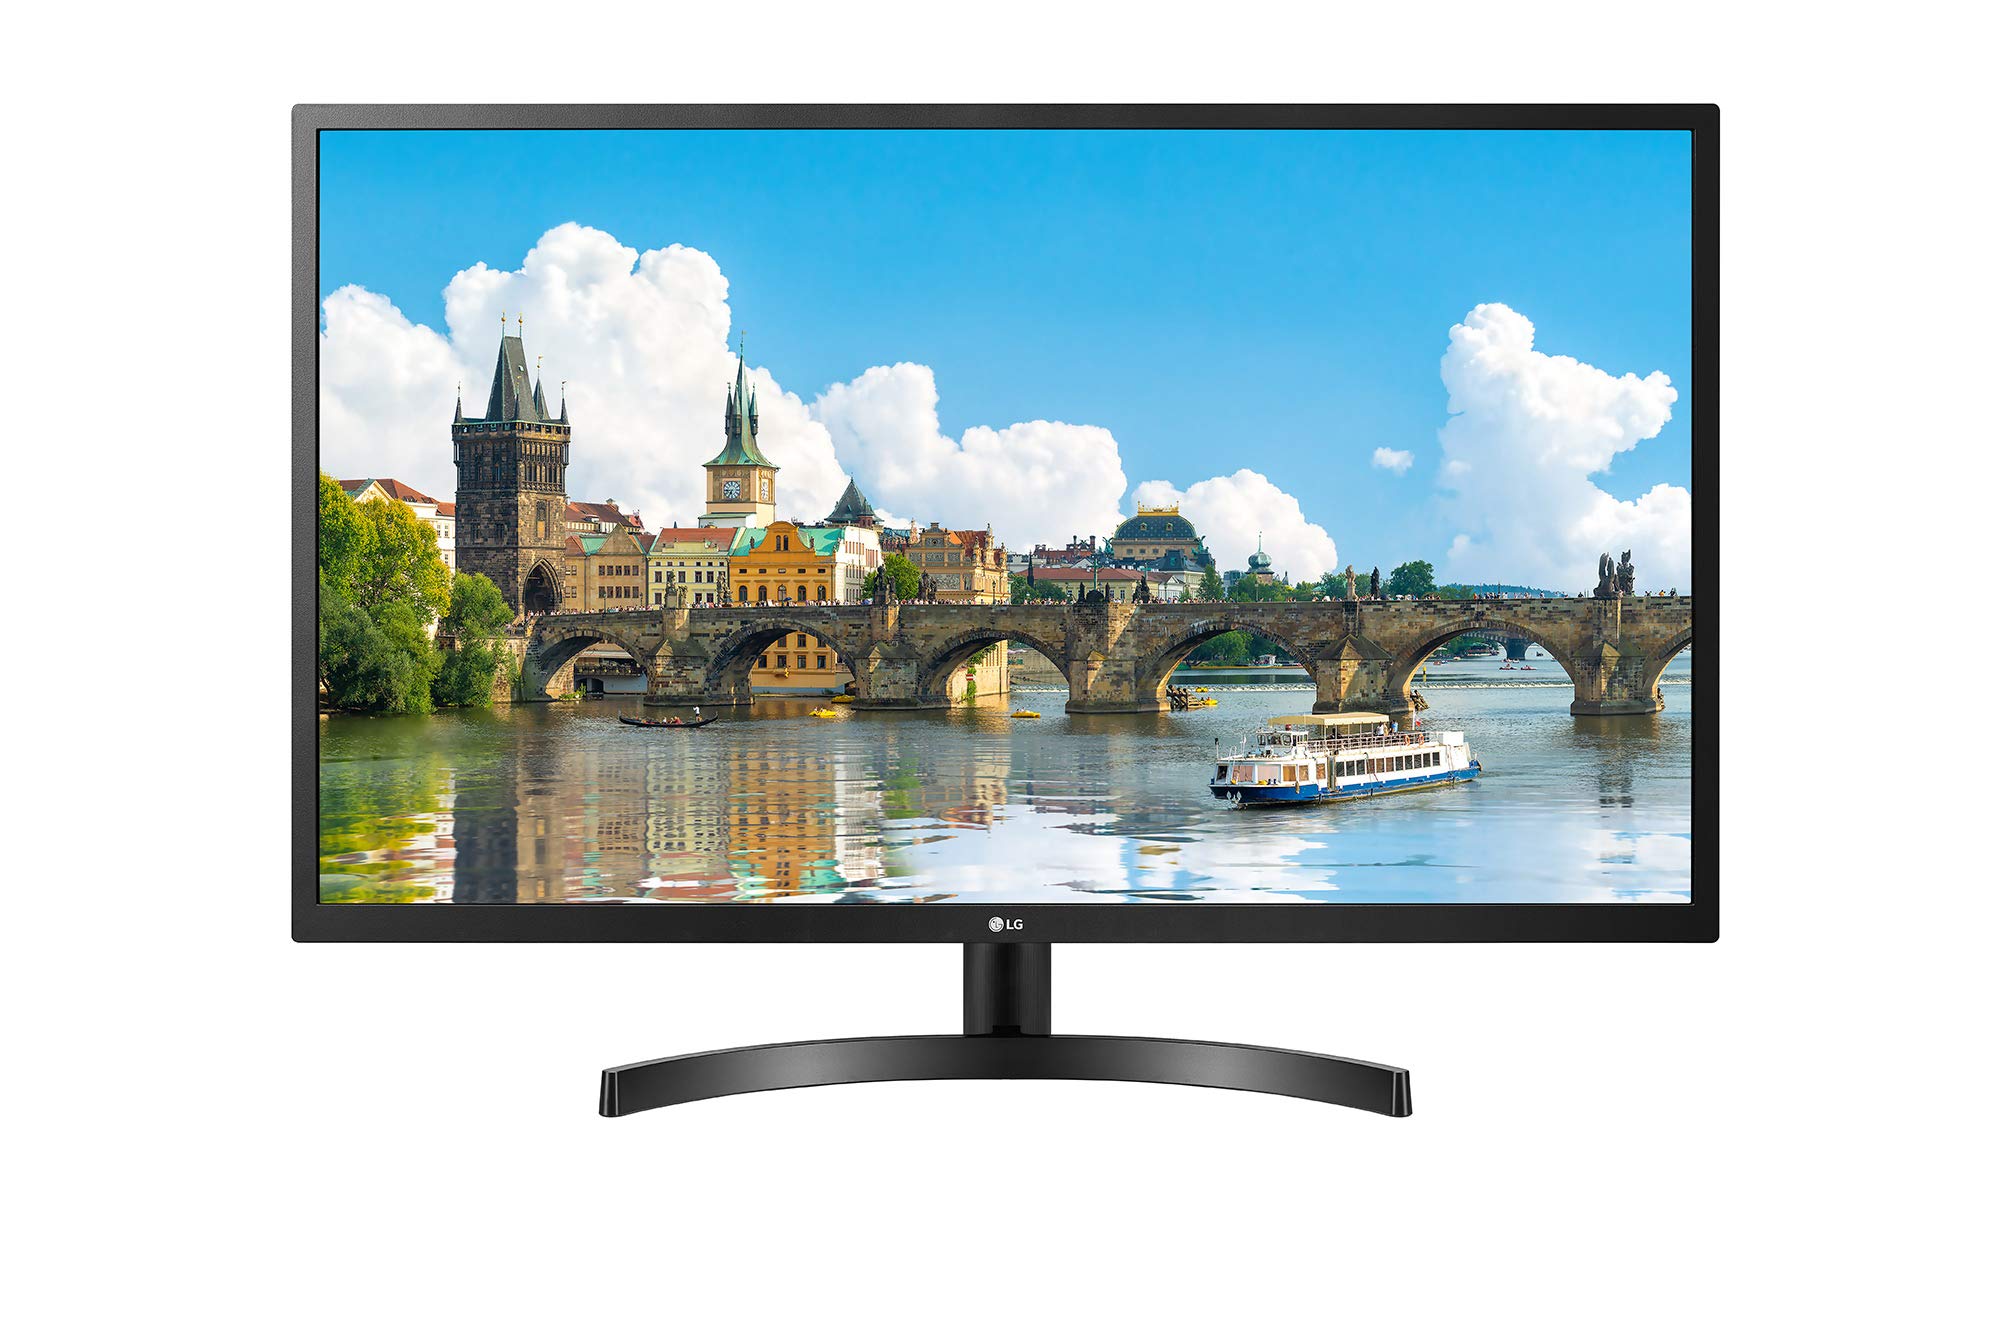 LG 32MN600P-B 31.5'' Full HD 1920 x 1080 IPS Monitor with AMD FreeSync with Display Port and HDMI Inputs (2020 Model)